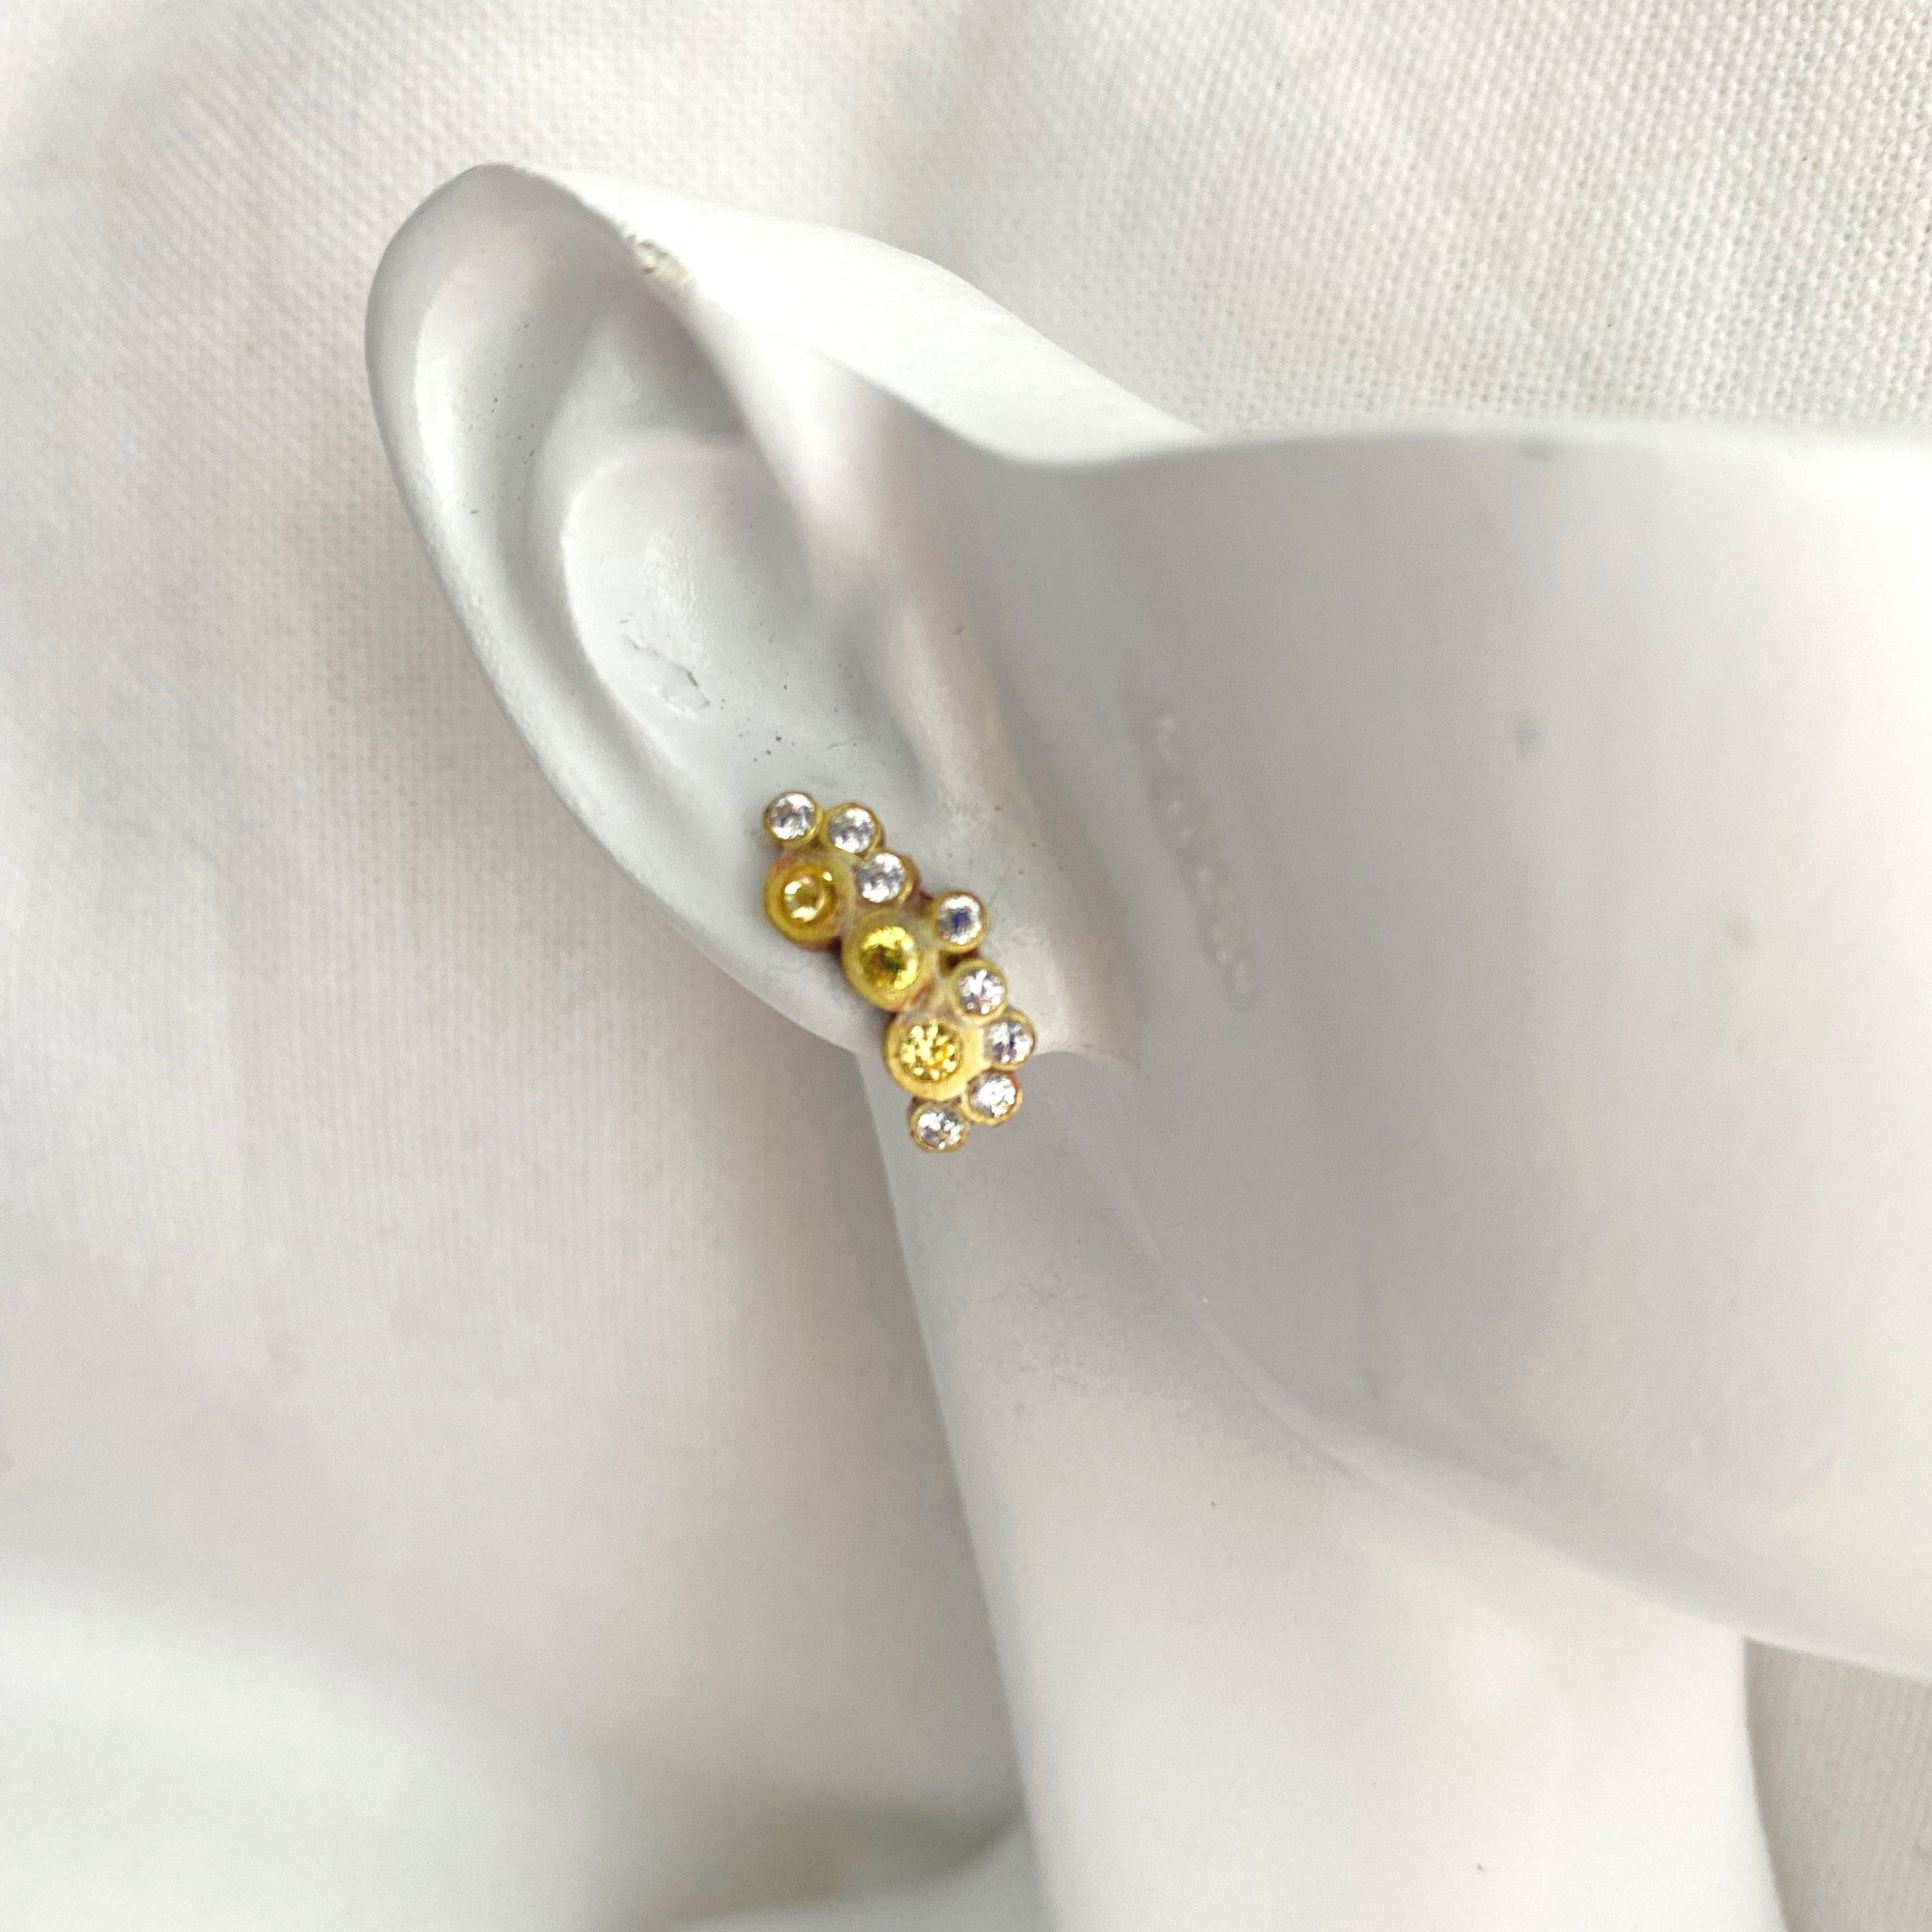 Blisstonique Yellow and White Sapphire Stud Earrings